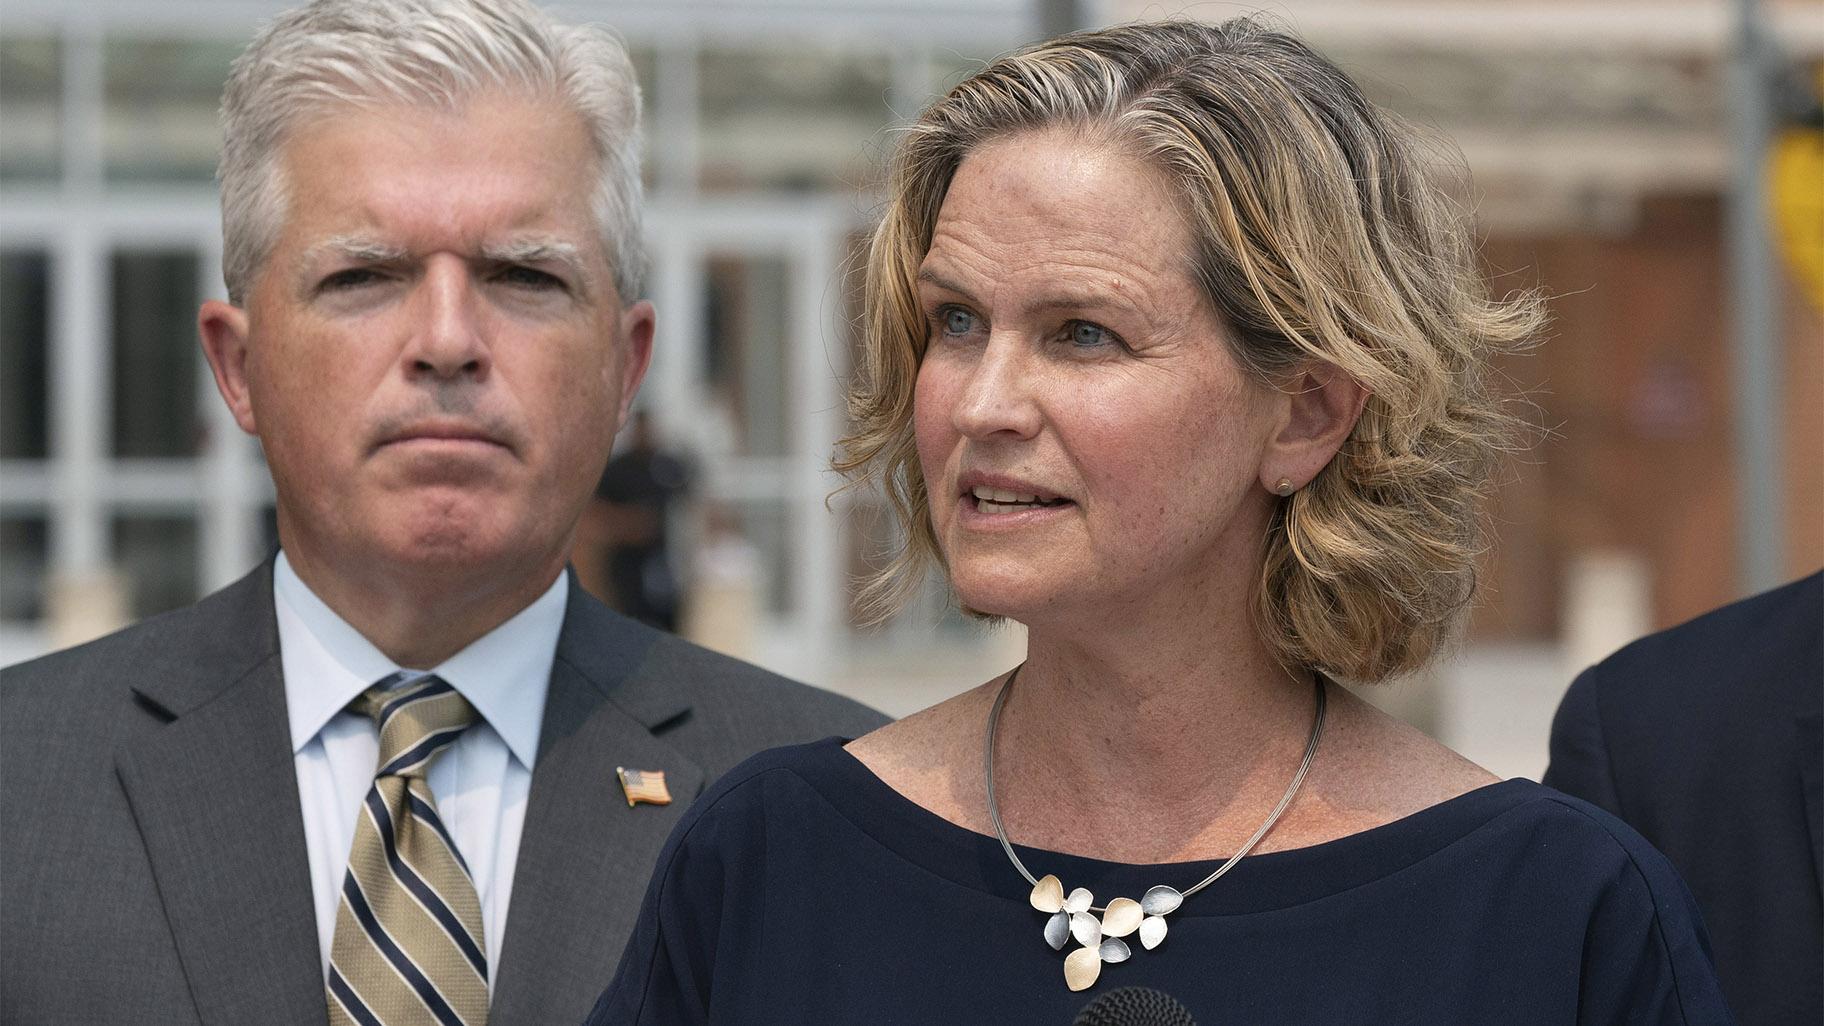 Nassau County Executive Laura Curran, right, speaks at a news conference to discuss a settlement in an opioid trial, Tuesday, July 20, 2021, in Central Islip, N.Y. Suffolk County Executive Steve Bellone is behind her. (AP Photo / Mark Lennihan)